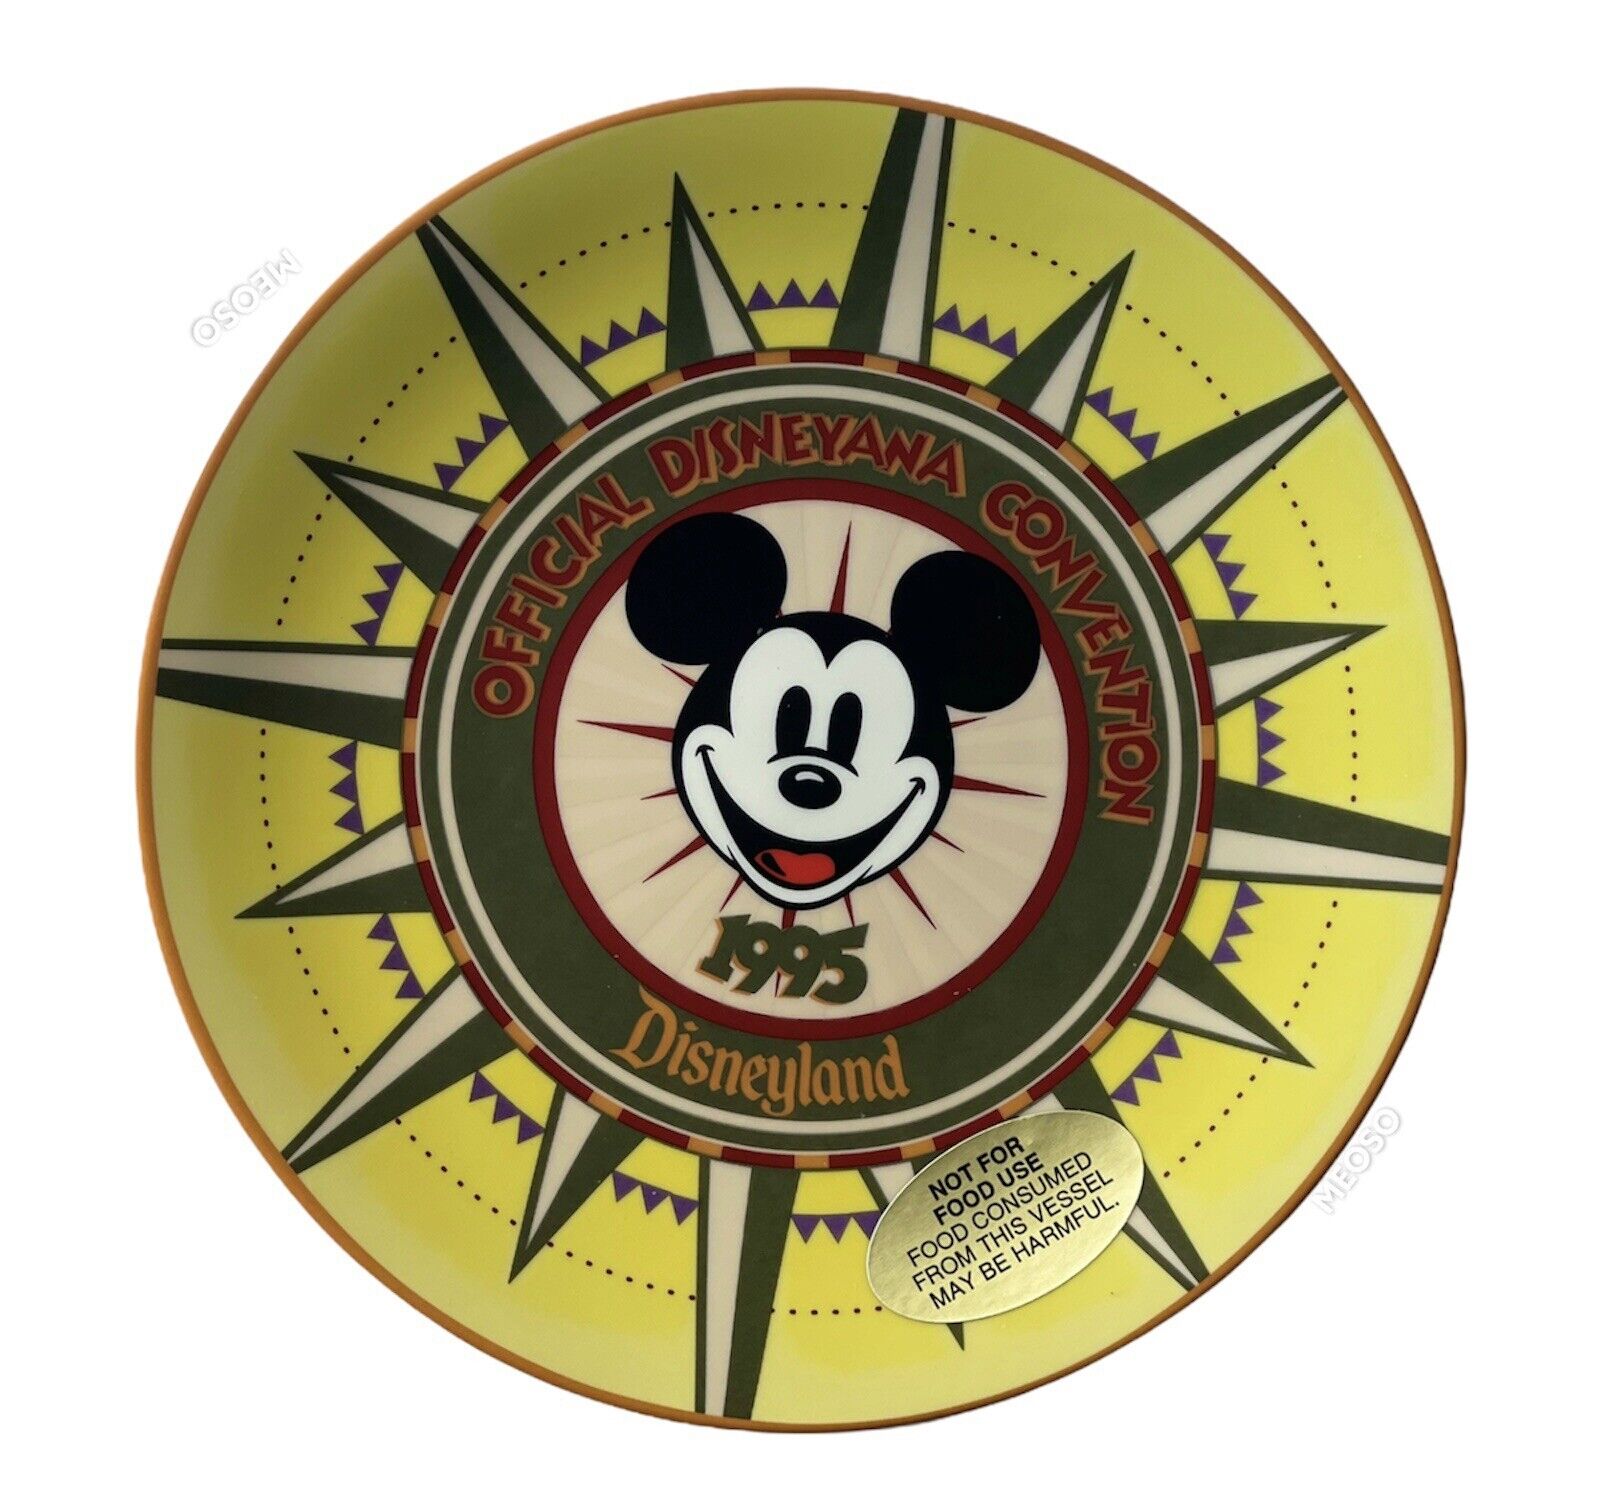 DISNEYLAND OFFICIAL DISNEYANA CONVENTION PLATE 1995 LIMITED TO 1500 PIECES